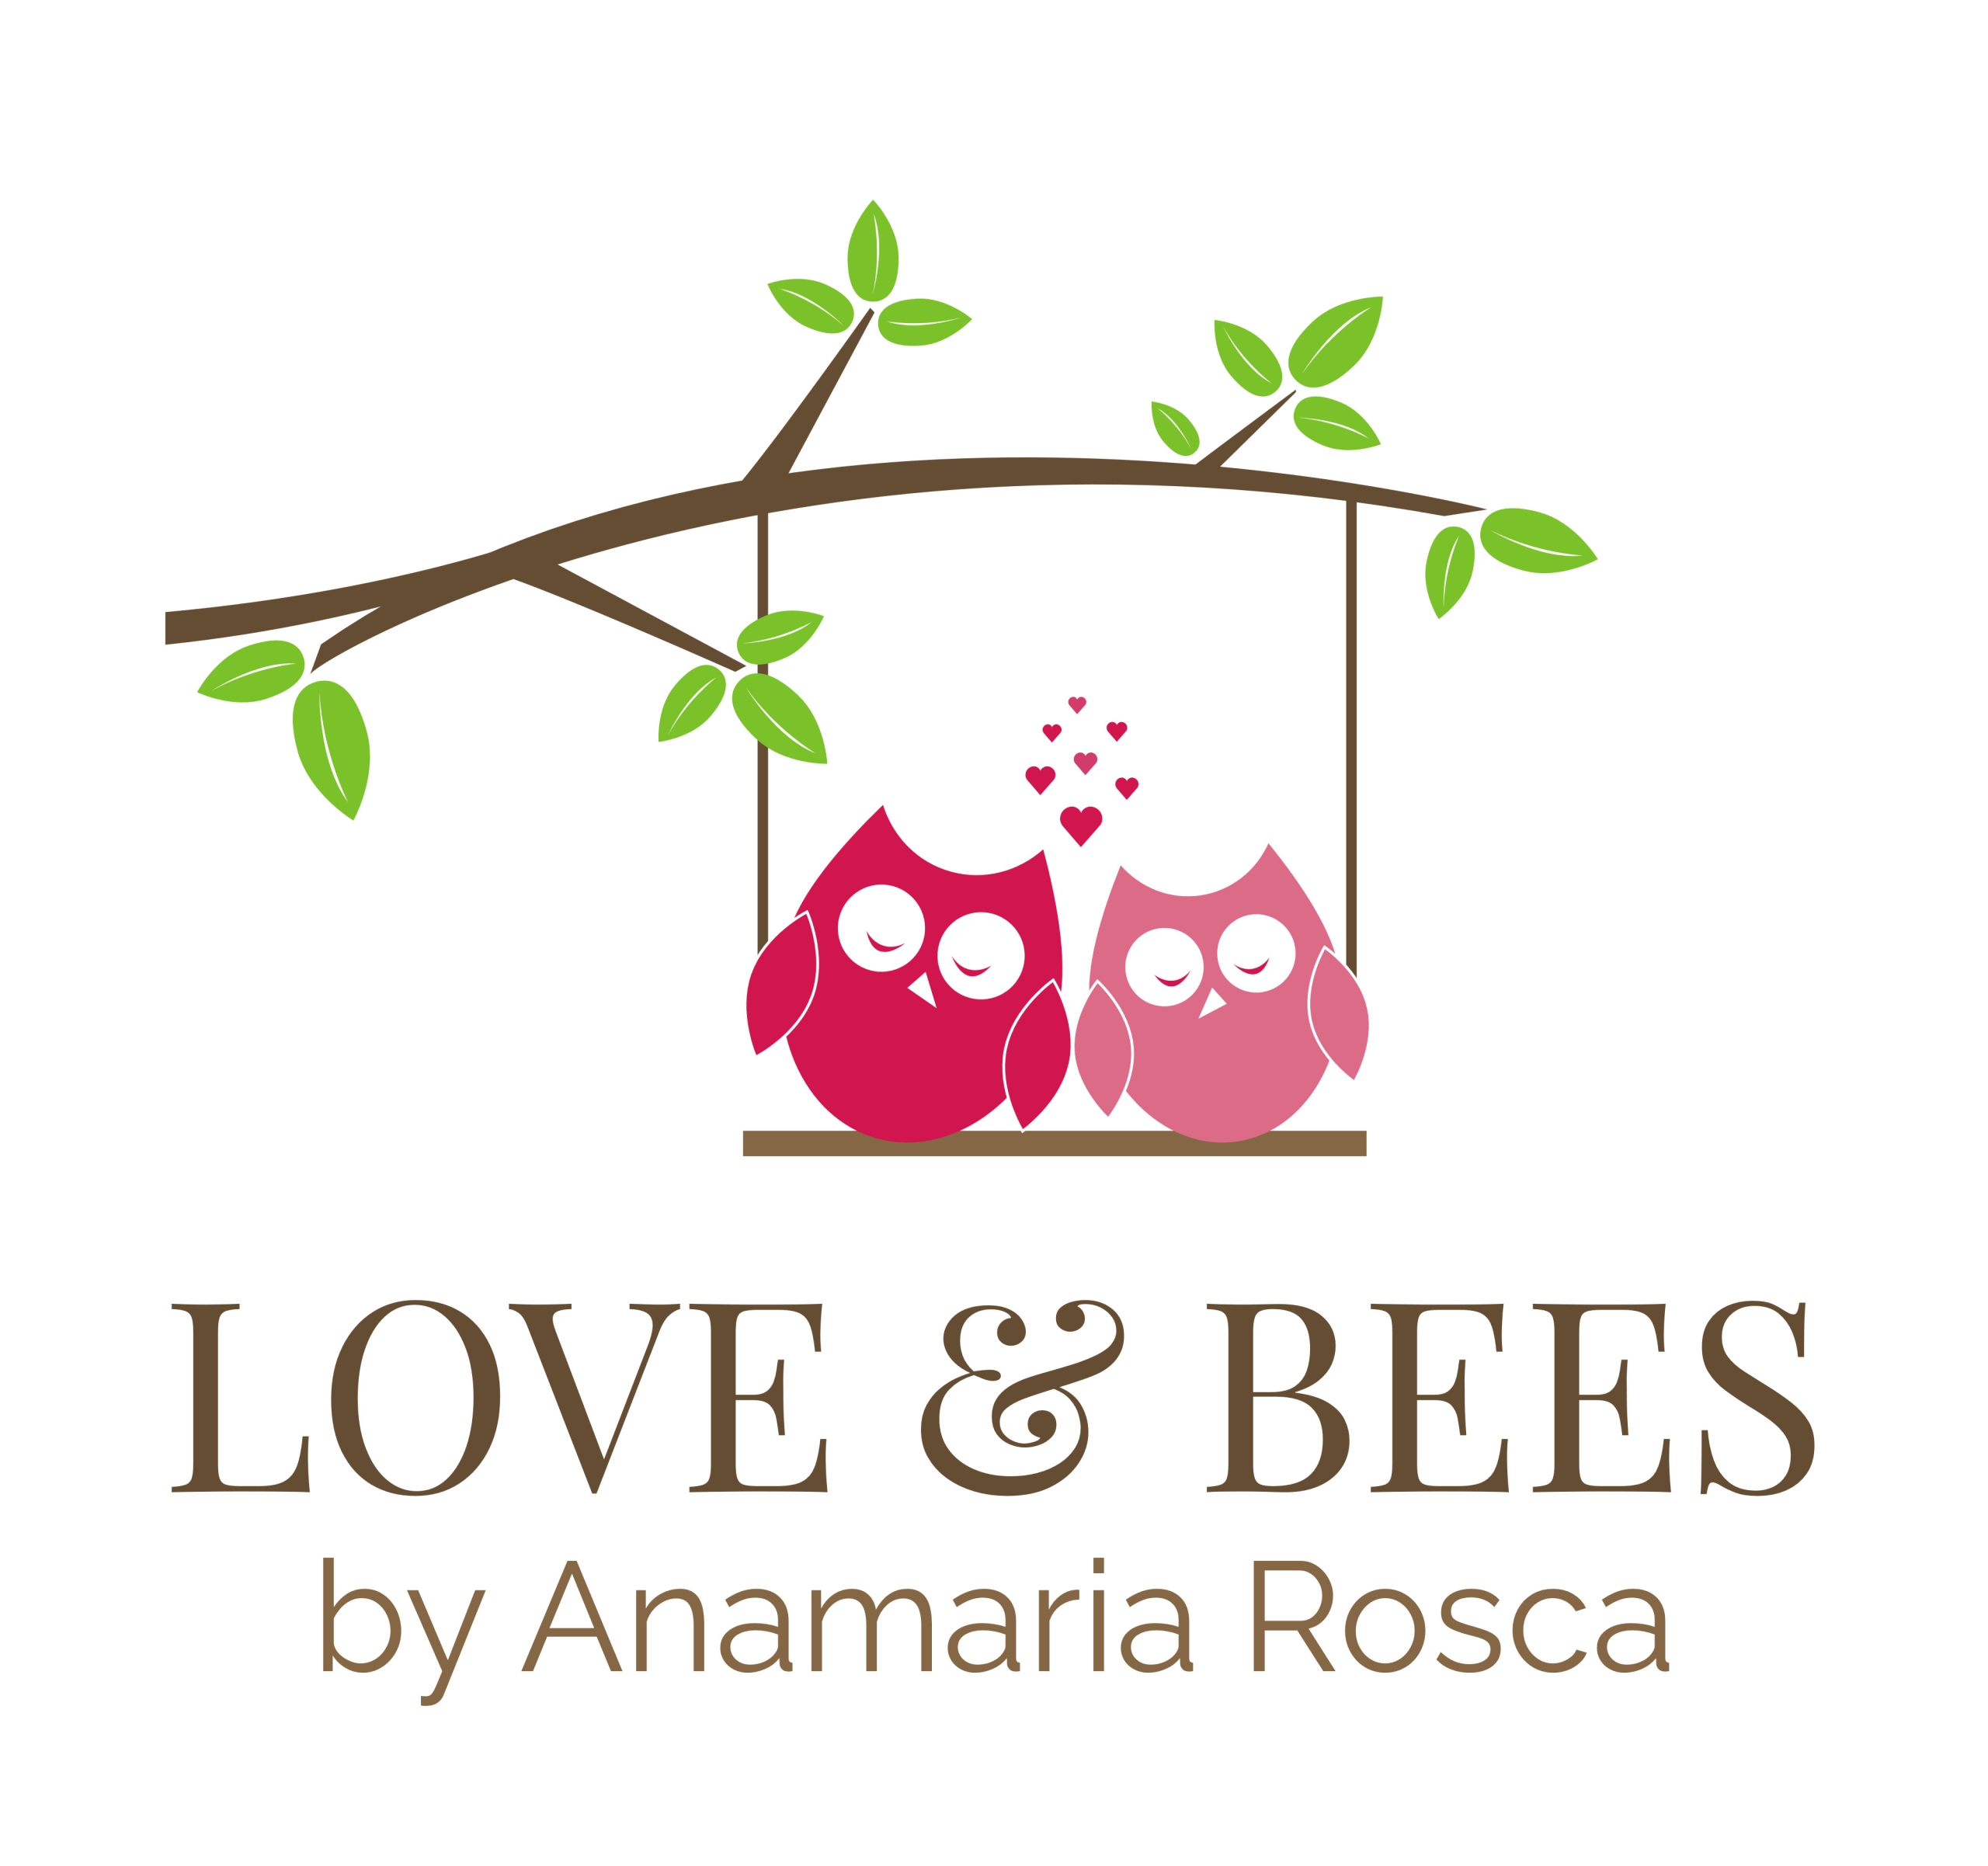 LOVE & BEES by Anamaria Rosca